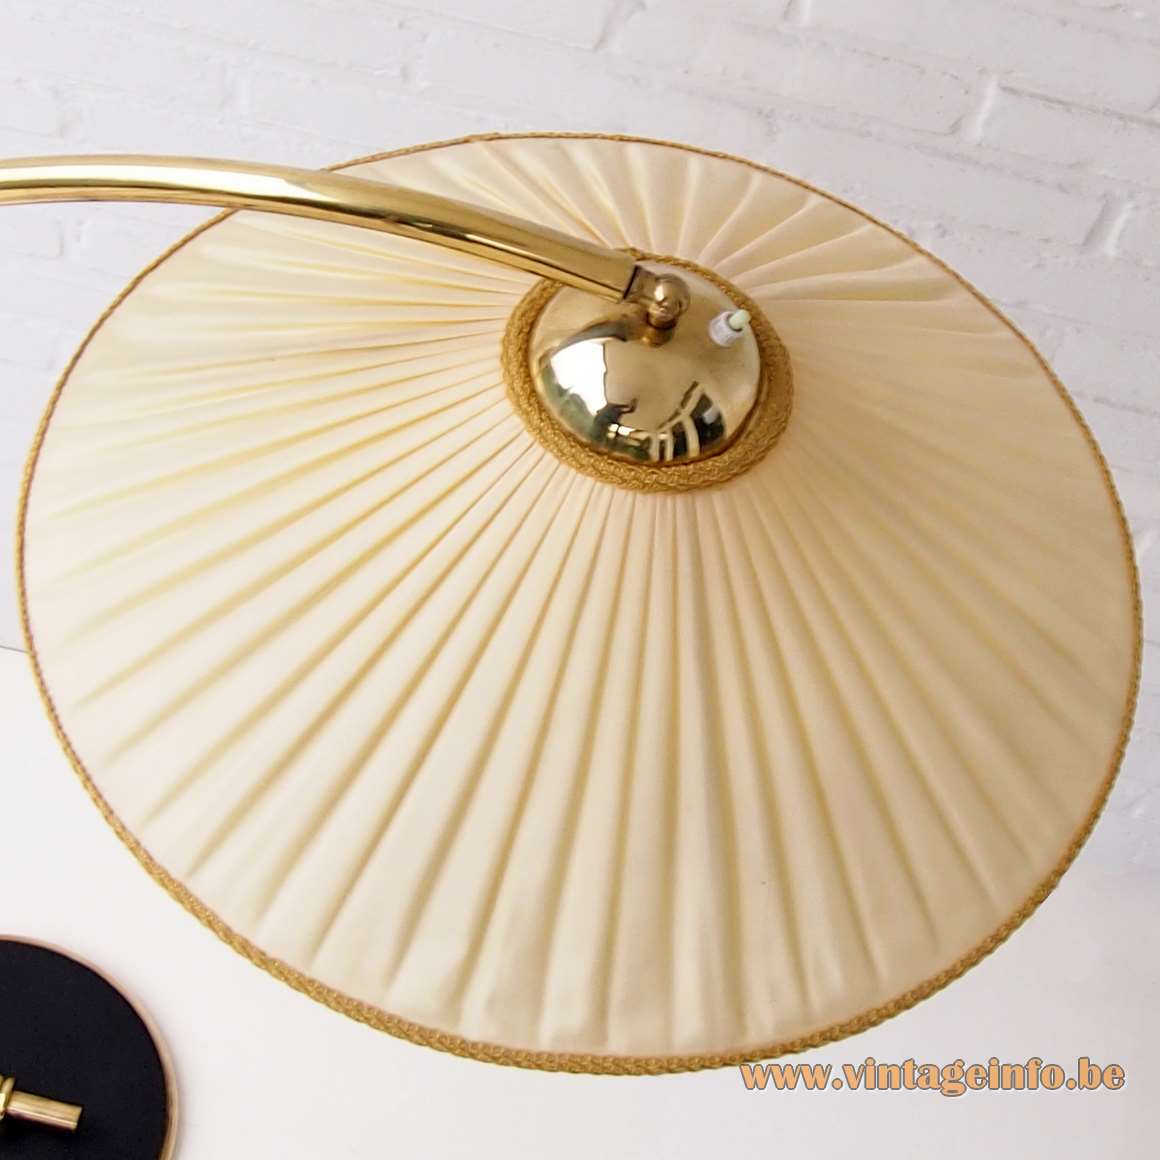 Rupert Nikoll 1950s floor lamp round black base brass curved rod conical fabric lampshade 1960s Austria